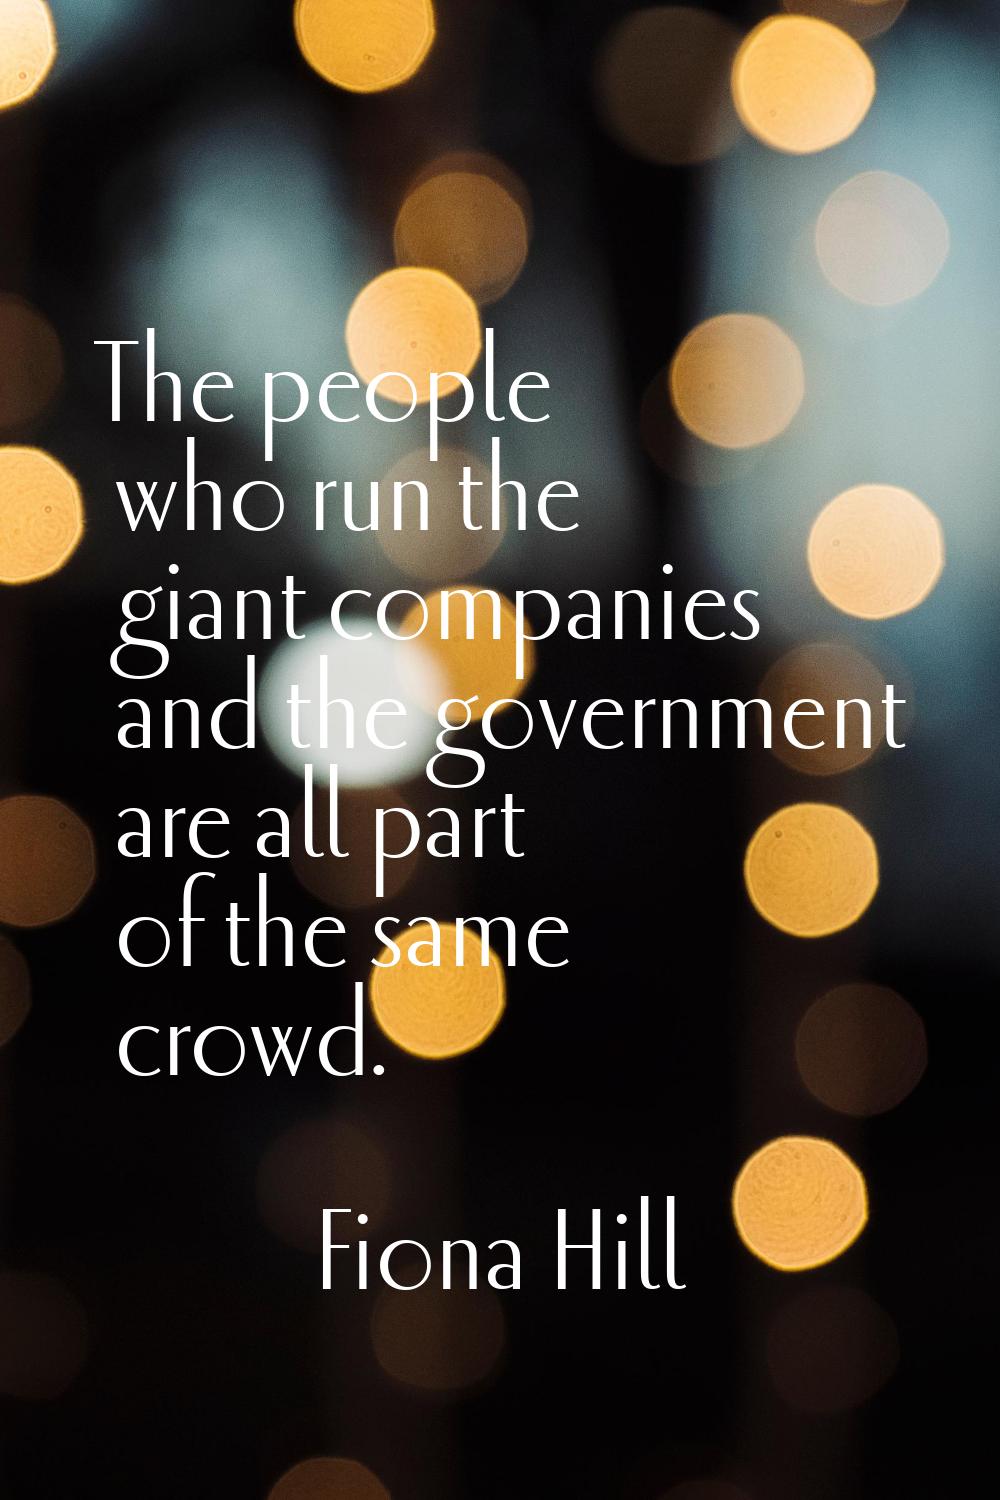 The people who run the giant companies and the government are all part of the same crowd.